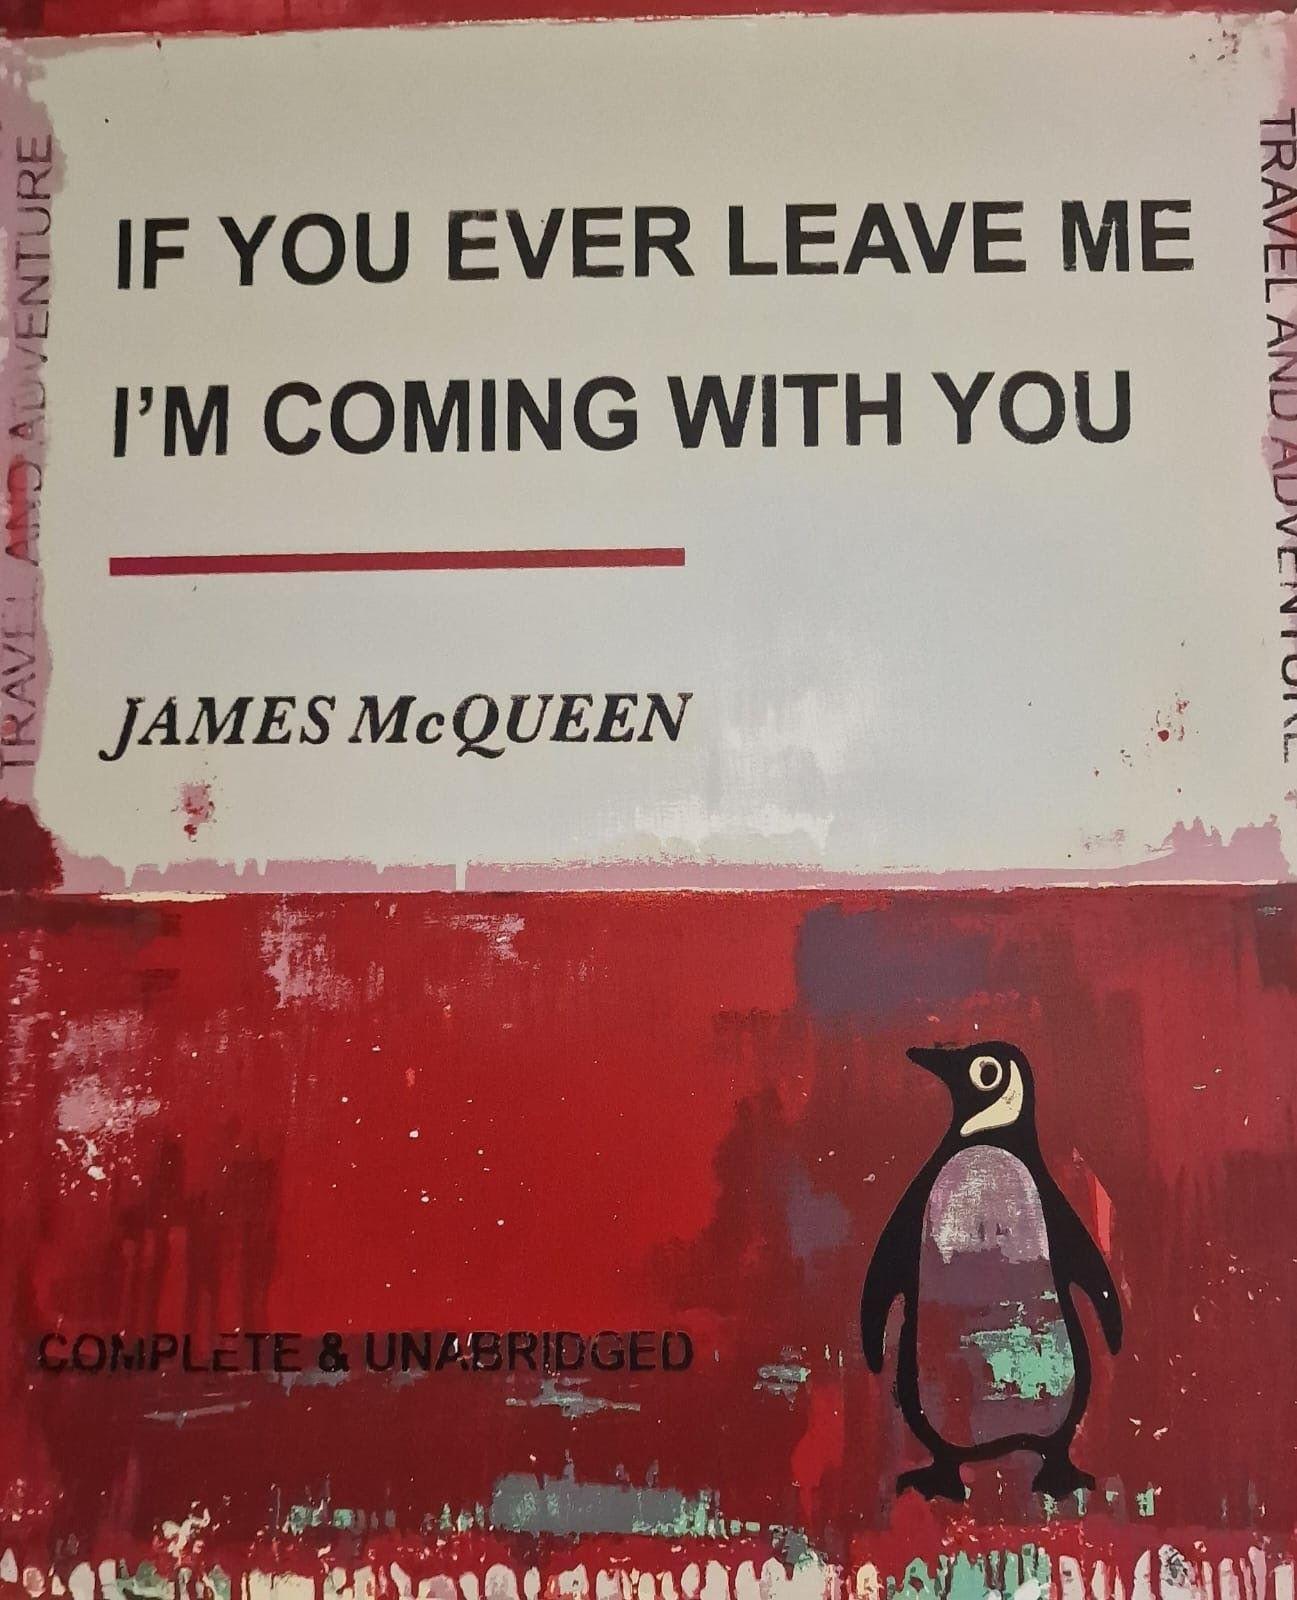 if you ever leave me i'm coming with you print